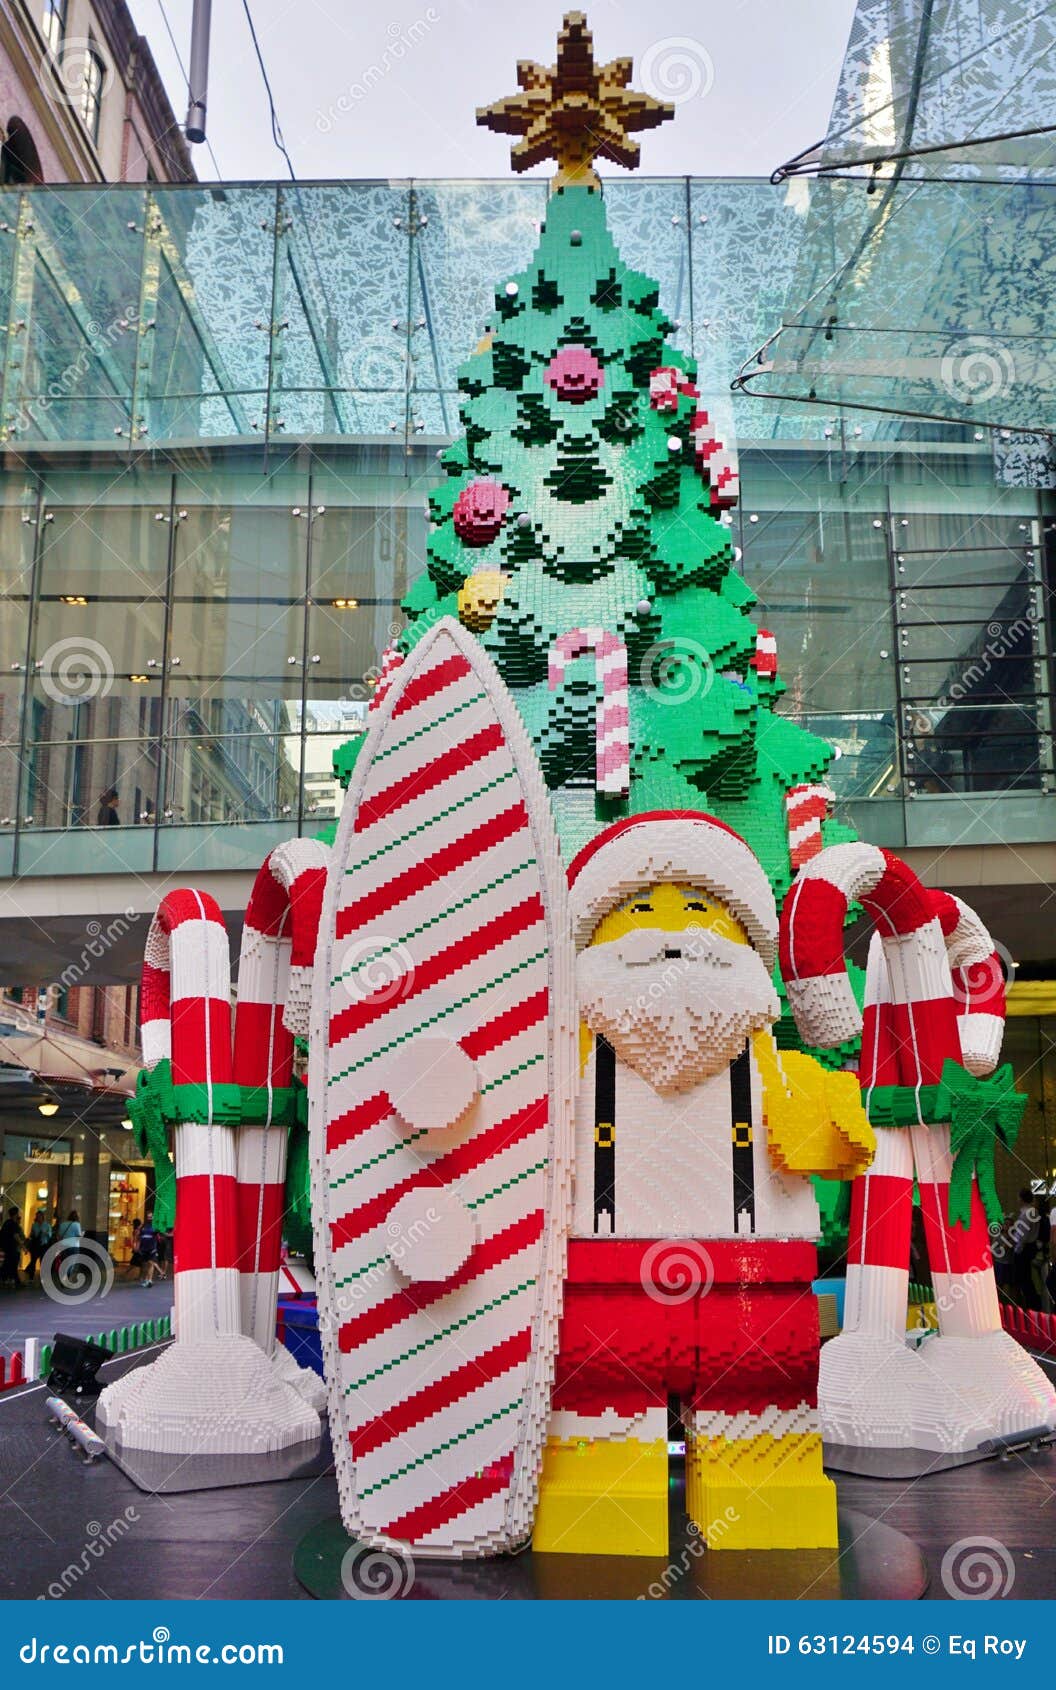 The Christmas Holiday Celebrated Down Under in Sydney with Lego ...